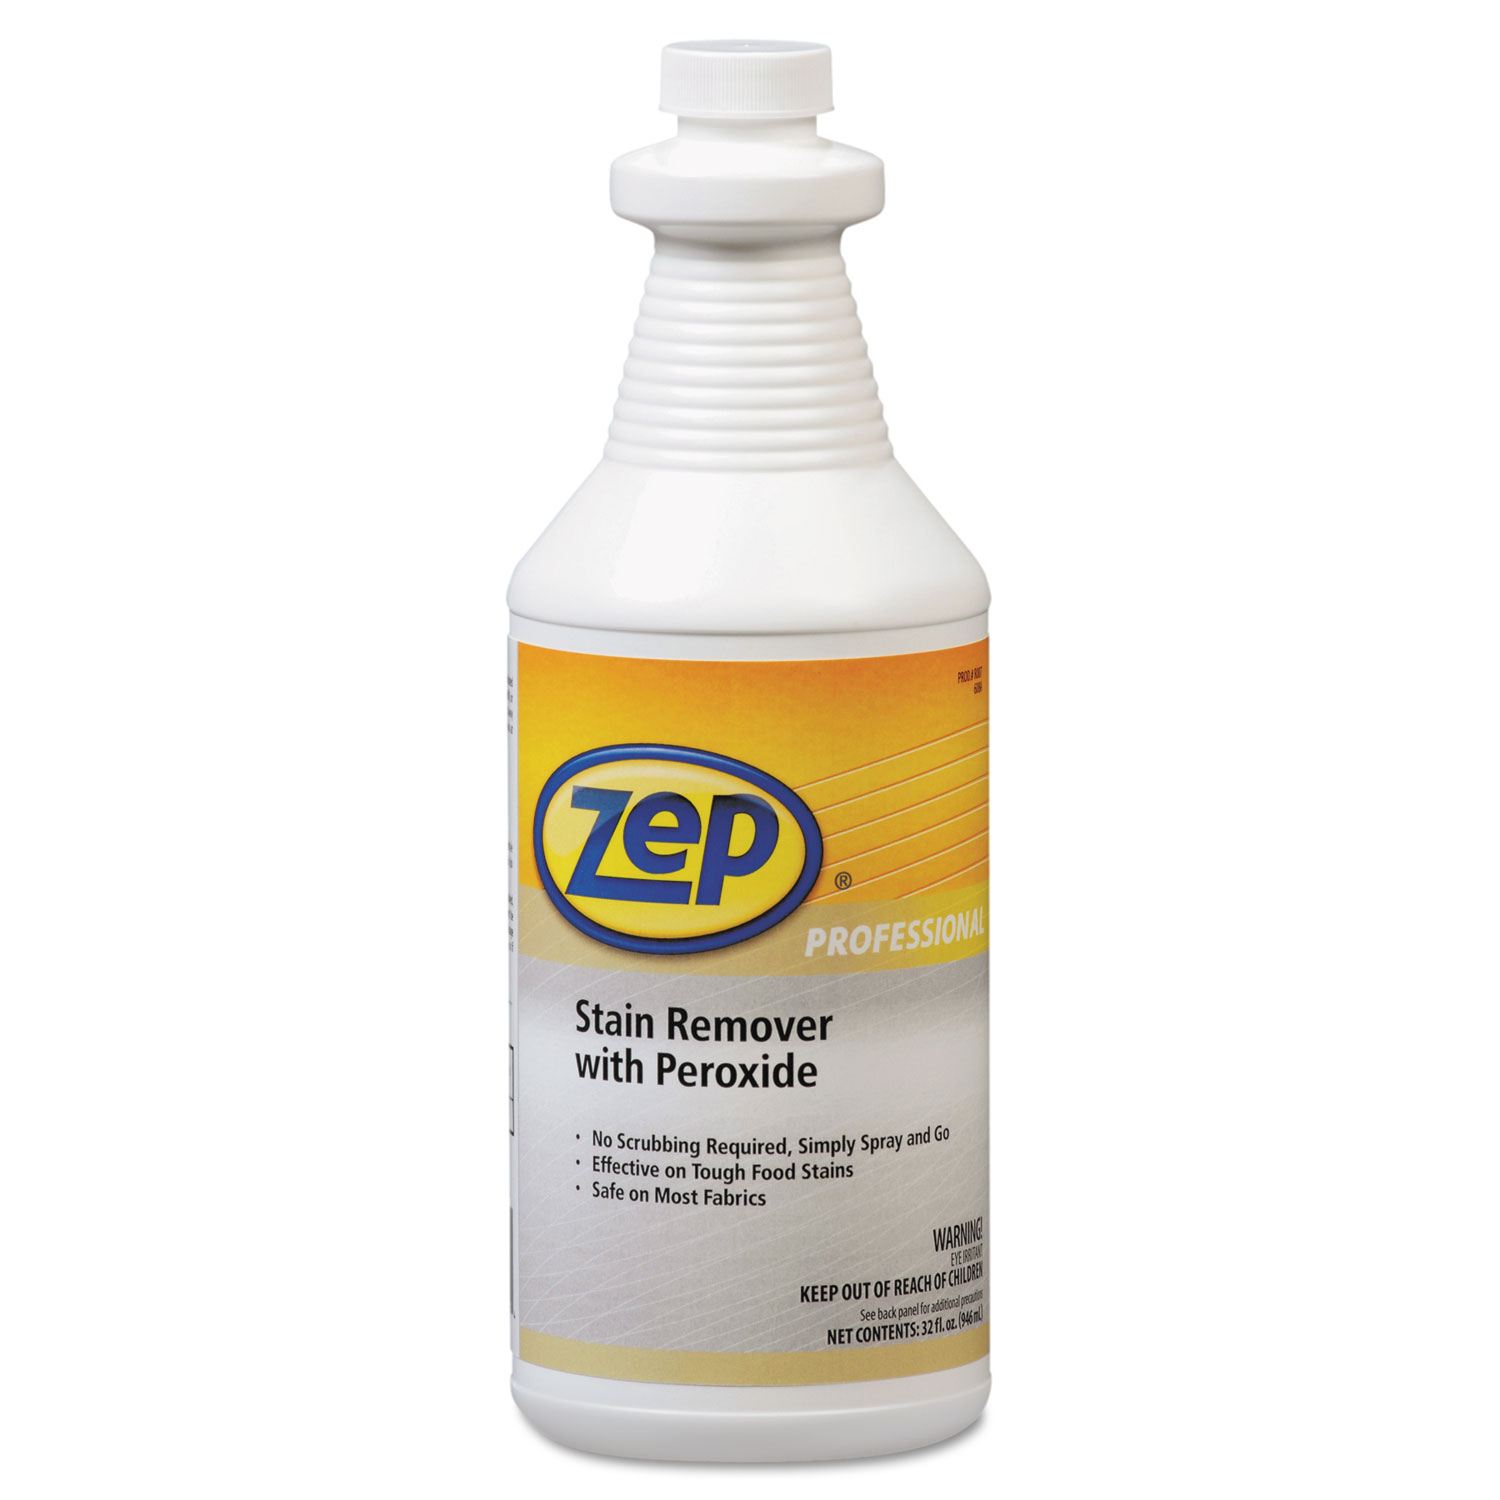  Zep Professional 1041705 Stain Remover with Peroxide, Quart Bottle, 6/Carton (ZPP1041705) 